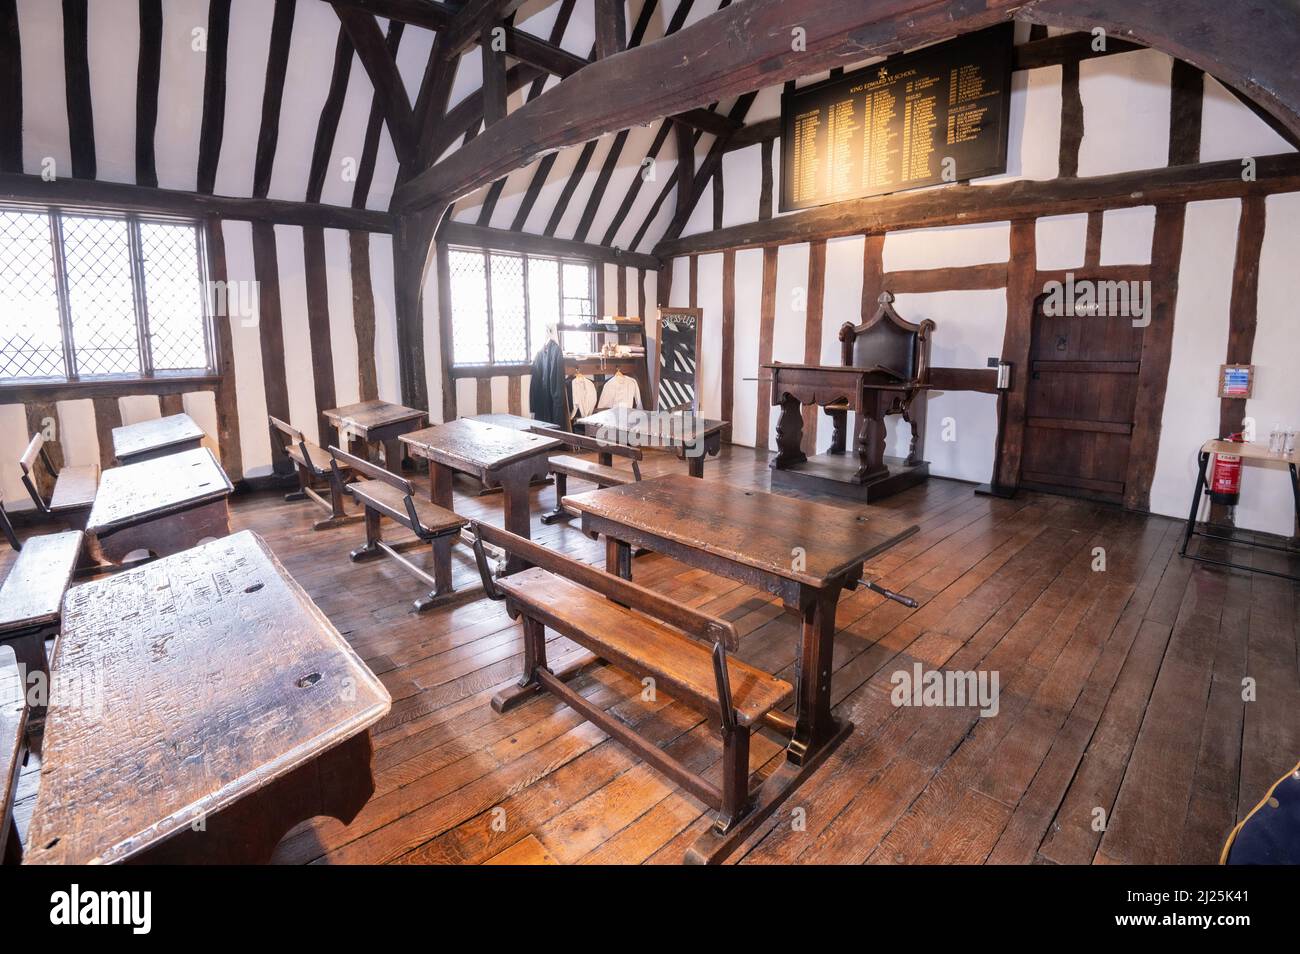 Shakespeare's classroom, where he studied as a young boy. Stratford-Upon-Avon town centre, Warwickshire, England. Stock Photo